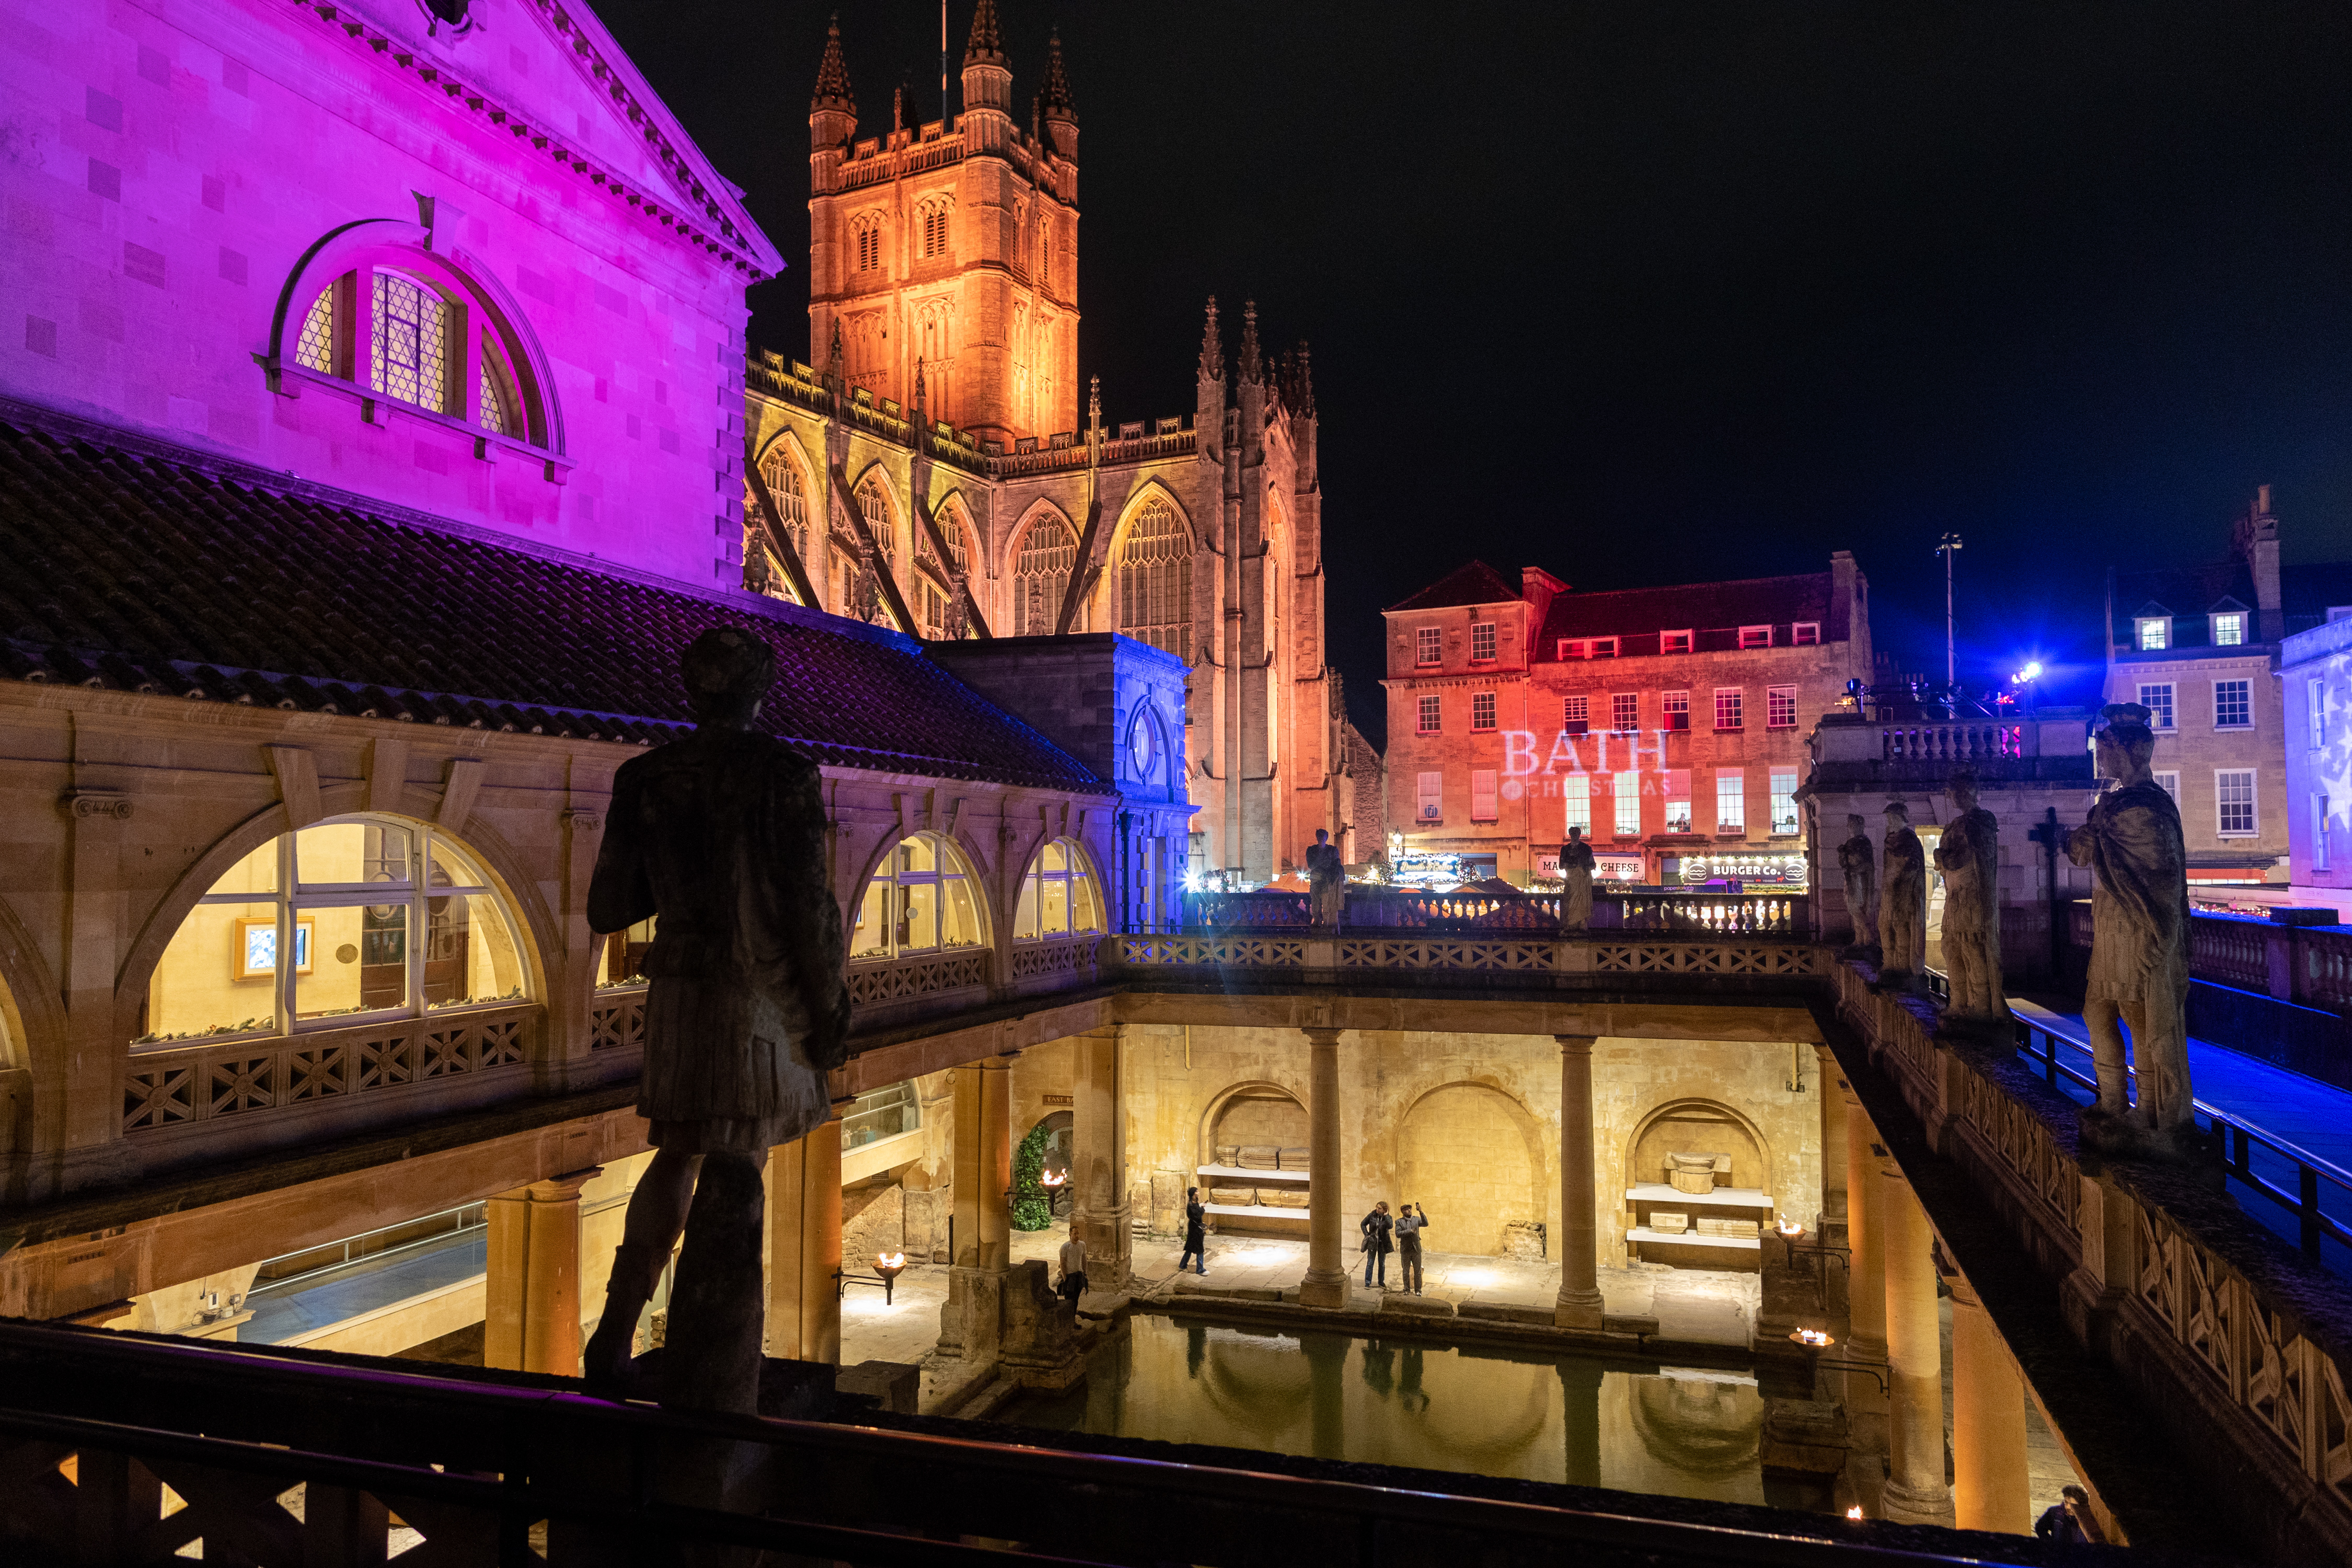 Image: The Roman Baths and Bath Abbey lit up at night